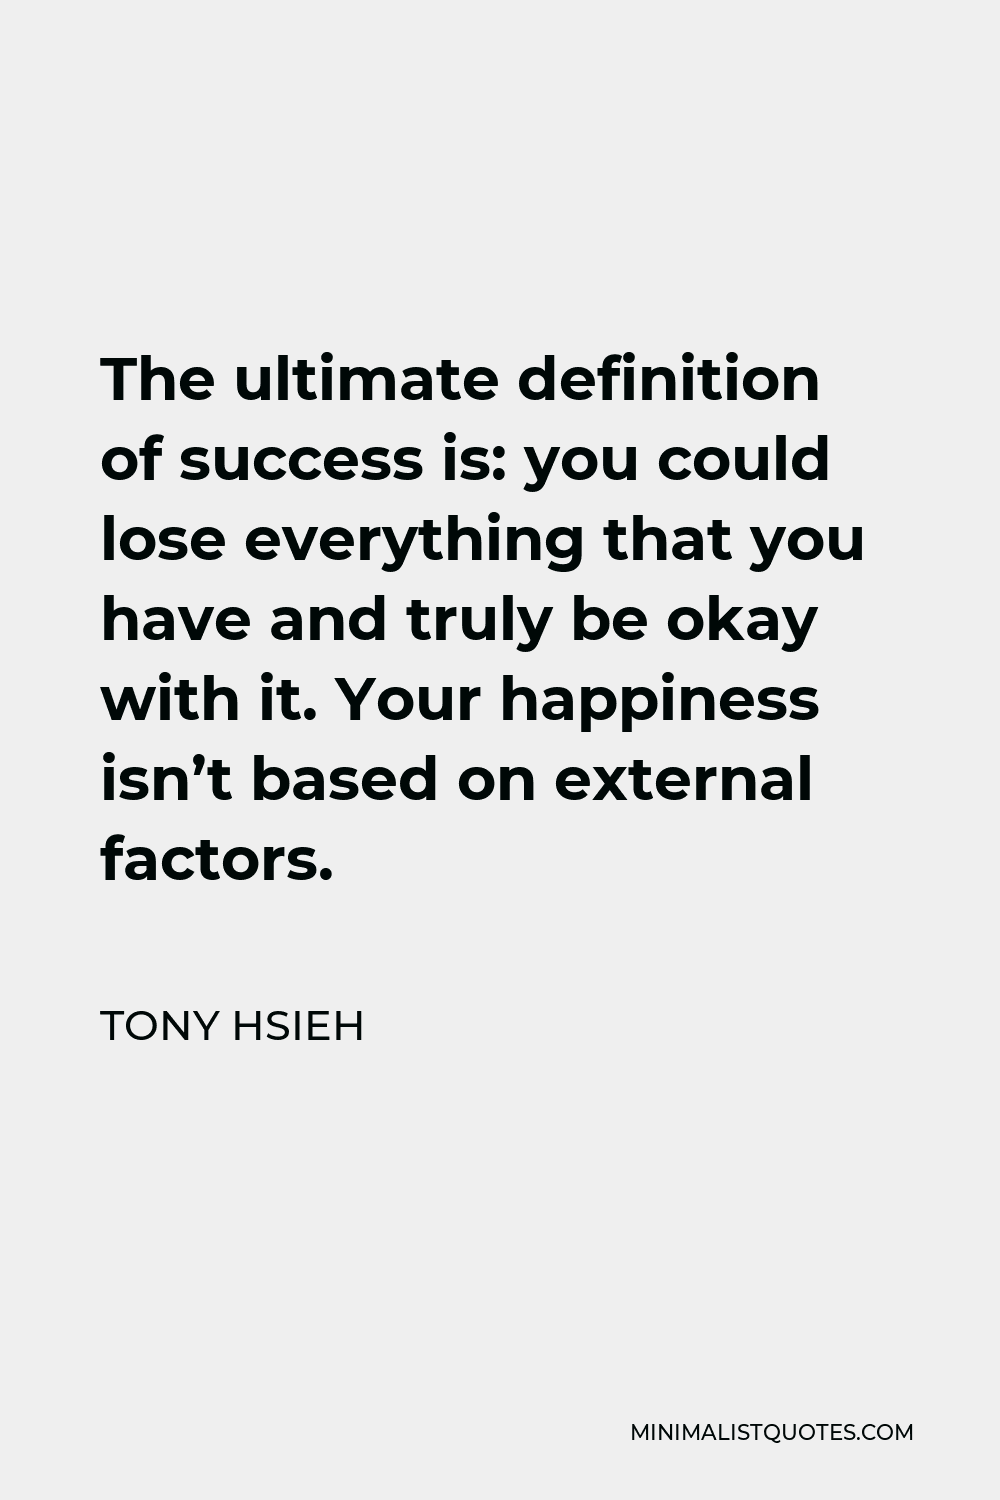 Tony Hsieh Quote - The ultimate definition of success is: you could lose everything that you have and truly be okay with it. Your happiness isn’t based on external factors.